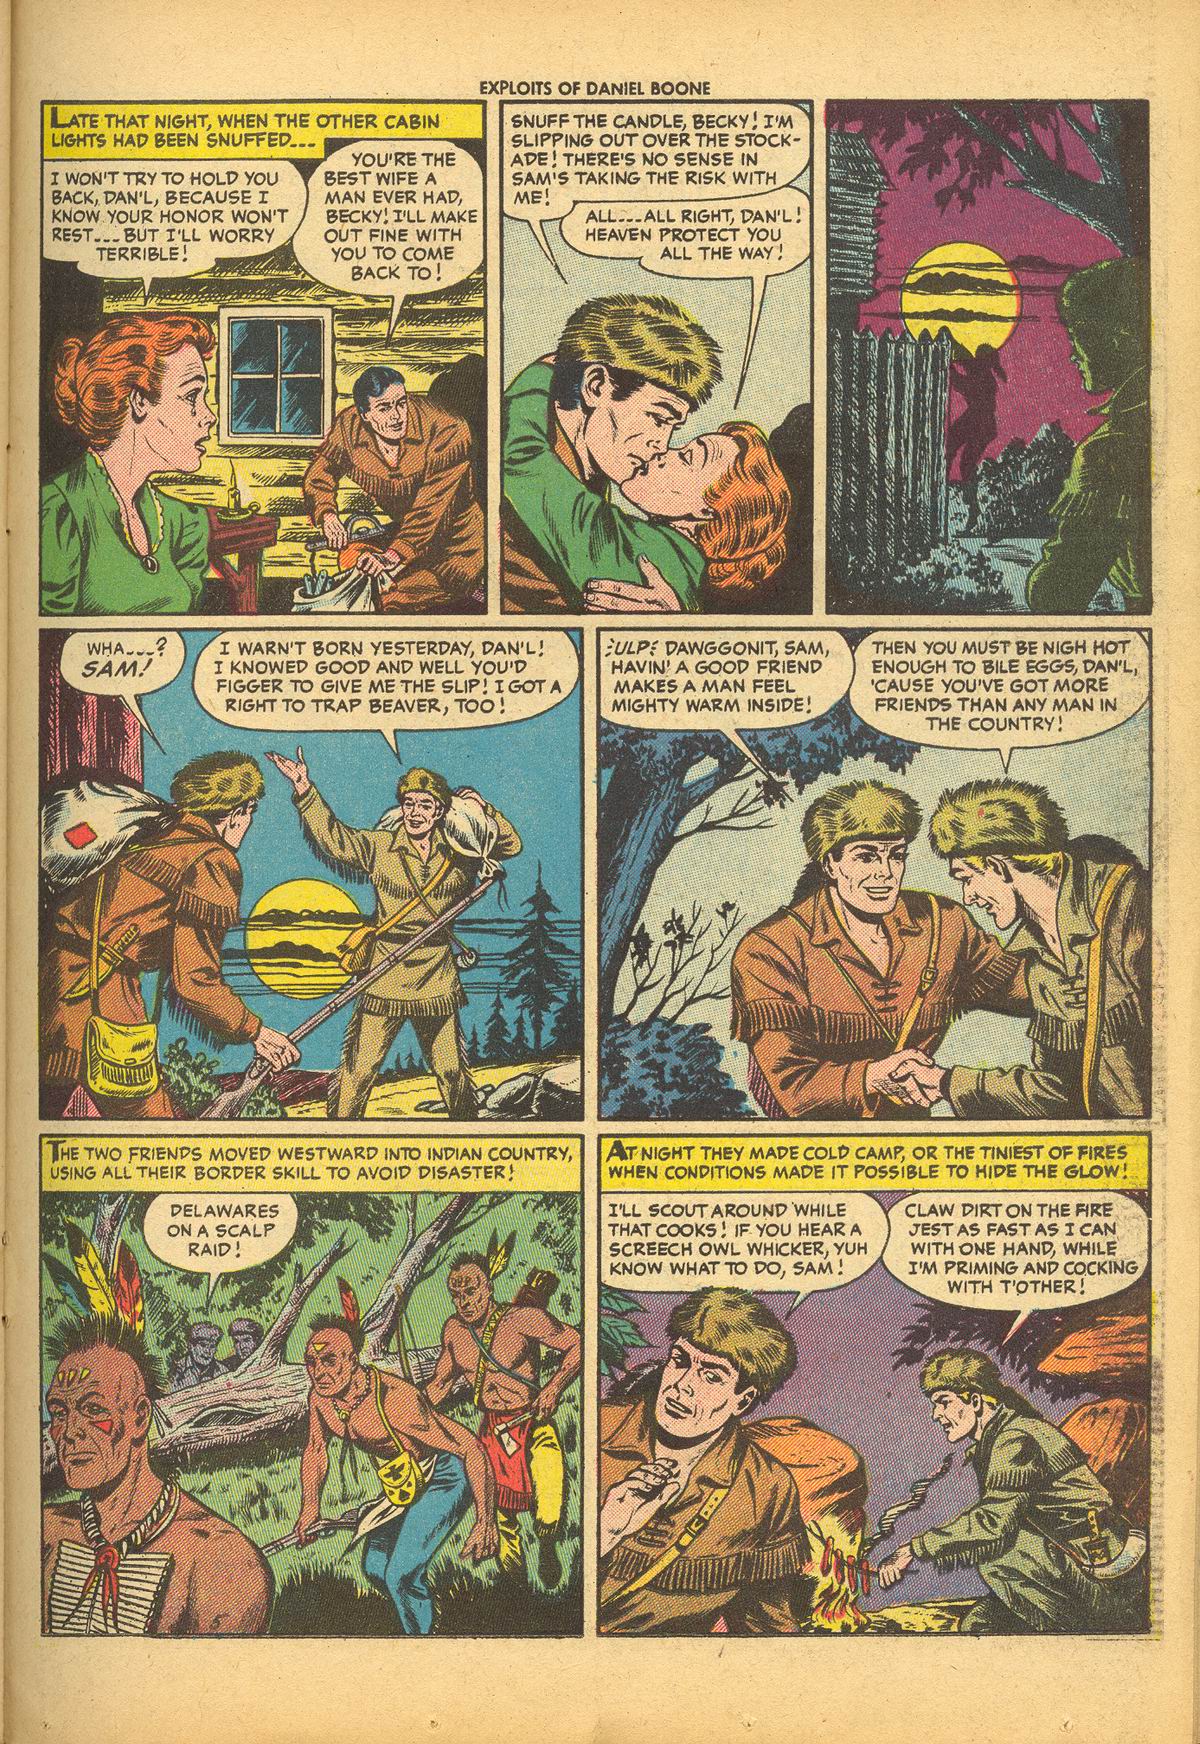 Read online Exploits of Daniel Boone comic -  Issue #3 - 23